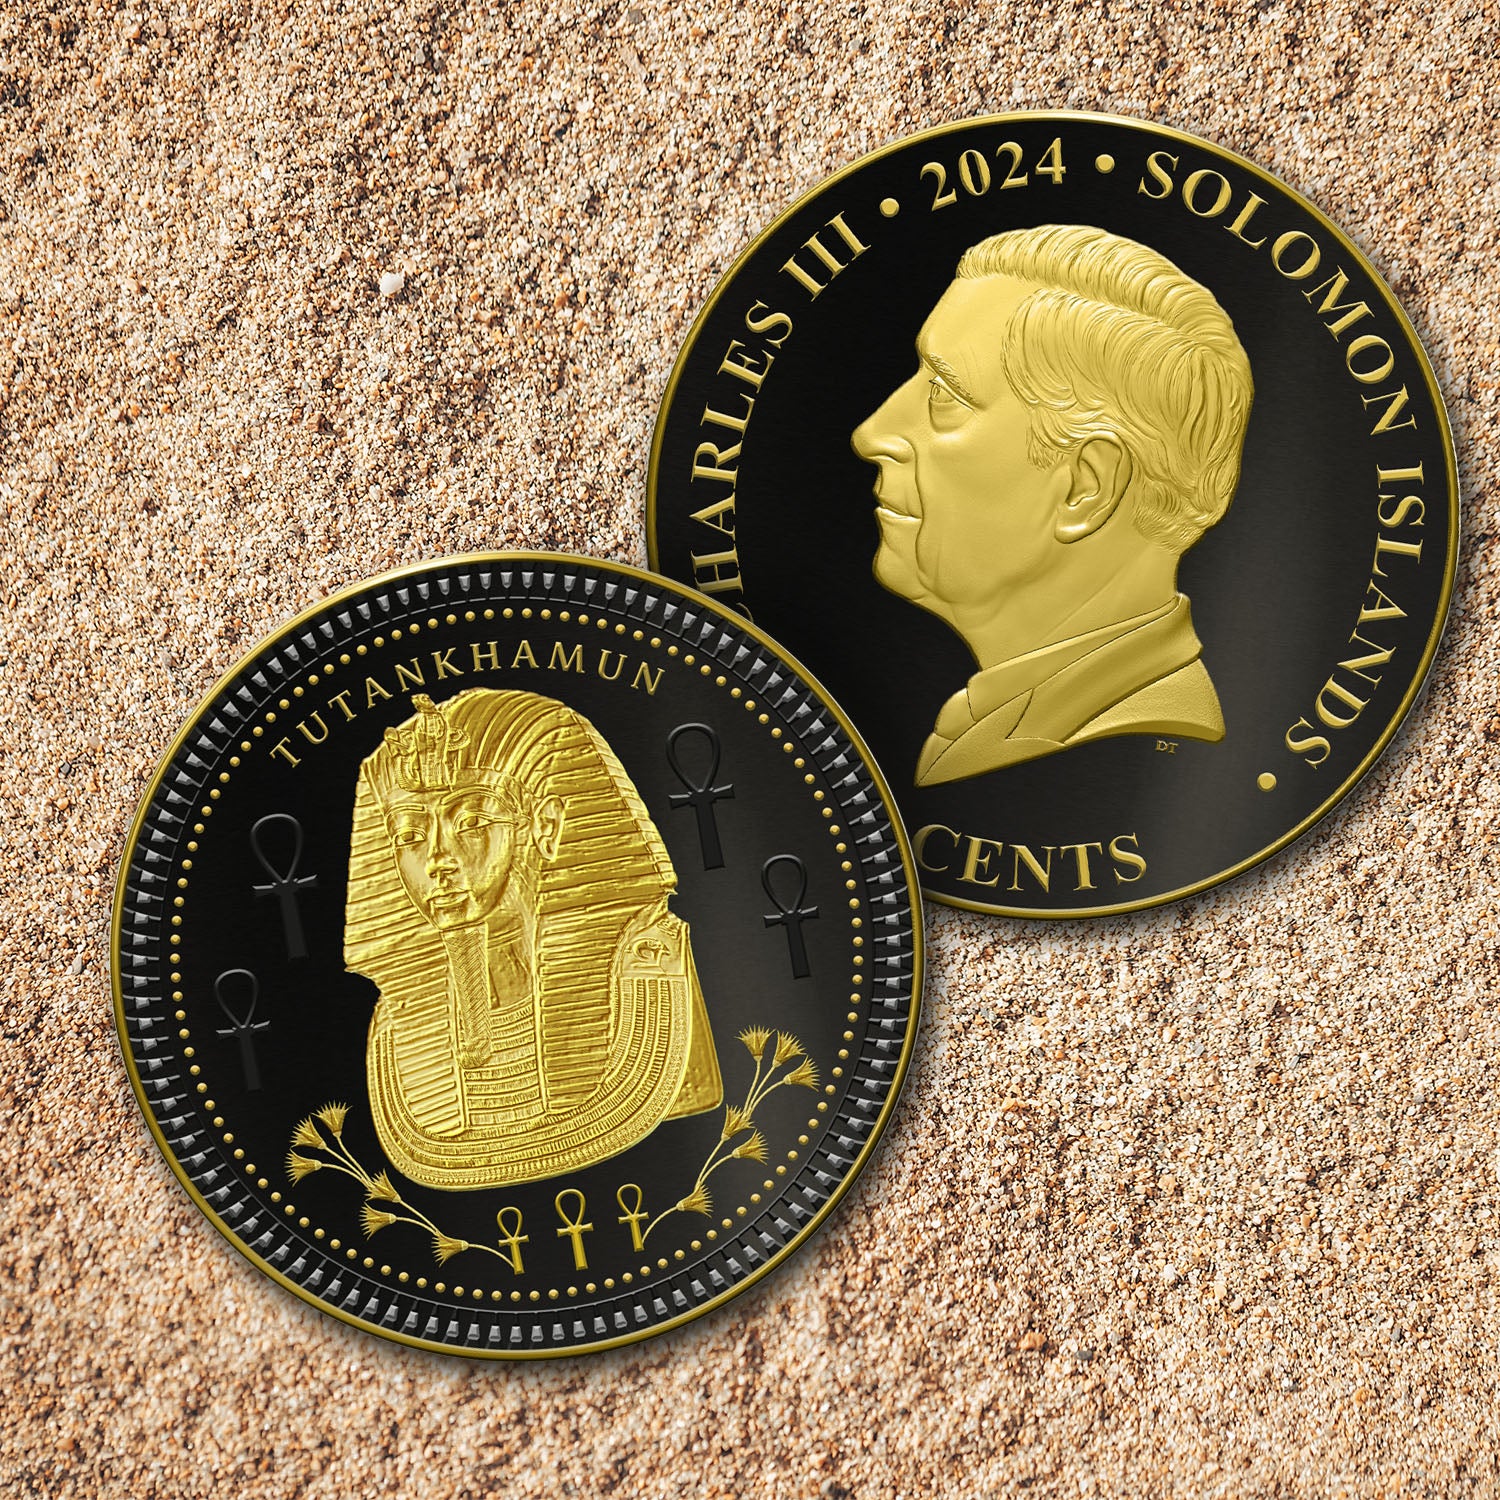 The Mysteries of Ancient Egypt 2024 Coin Collection